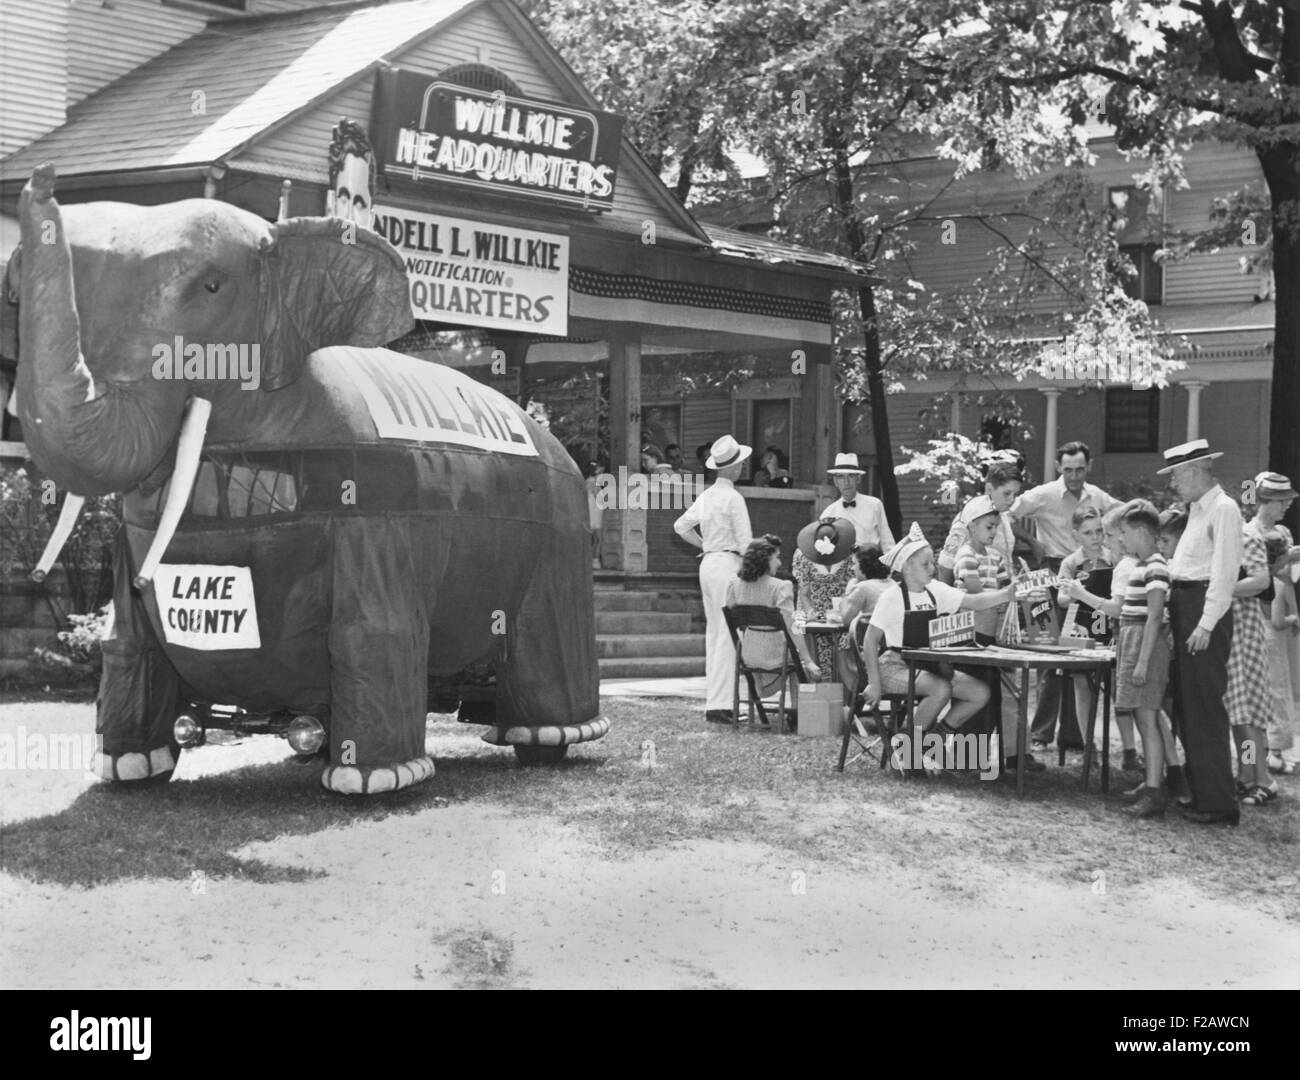 A large cloth elephant attacks shoppers to a souvenir stand at Elwood, Indiana, Aug. 15, 1940. They were preparing for Willkie's appearance to make his formal acceptance of the Republican President nomination. (CSU 2015 11 1403) Stock Photo